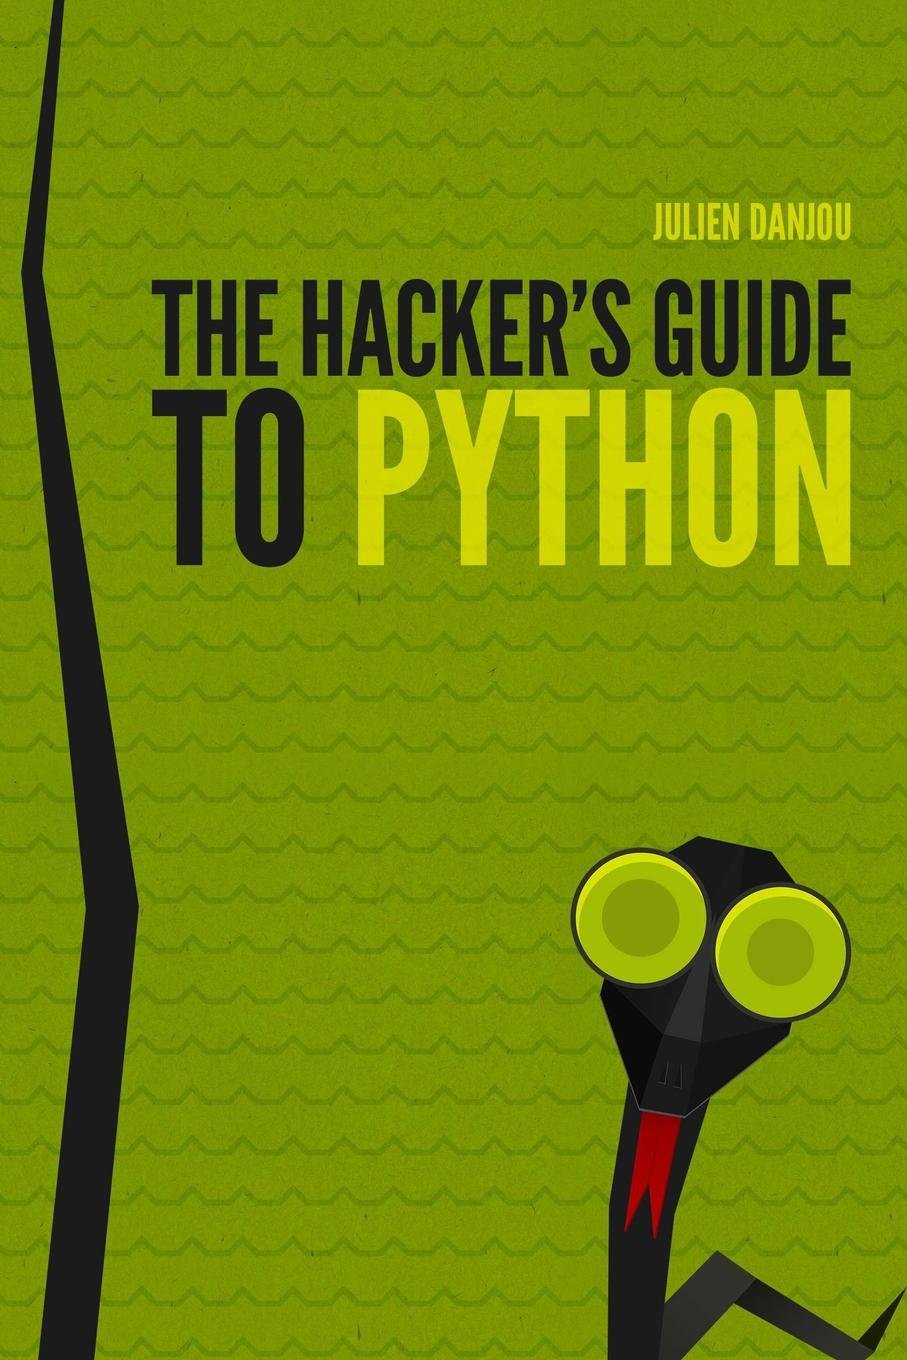 the hacker's guide to python,the hacker's guide to python github,the hacker's guide to python download,the hacker's guide to scaling python,hacker's guide to python,the hacker's guide to python julien danjou pdf,the hacker’s guide to scaling python,the hackers guide to scaling python,hackers guide to scaling python